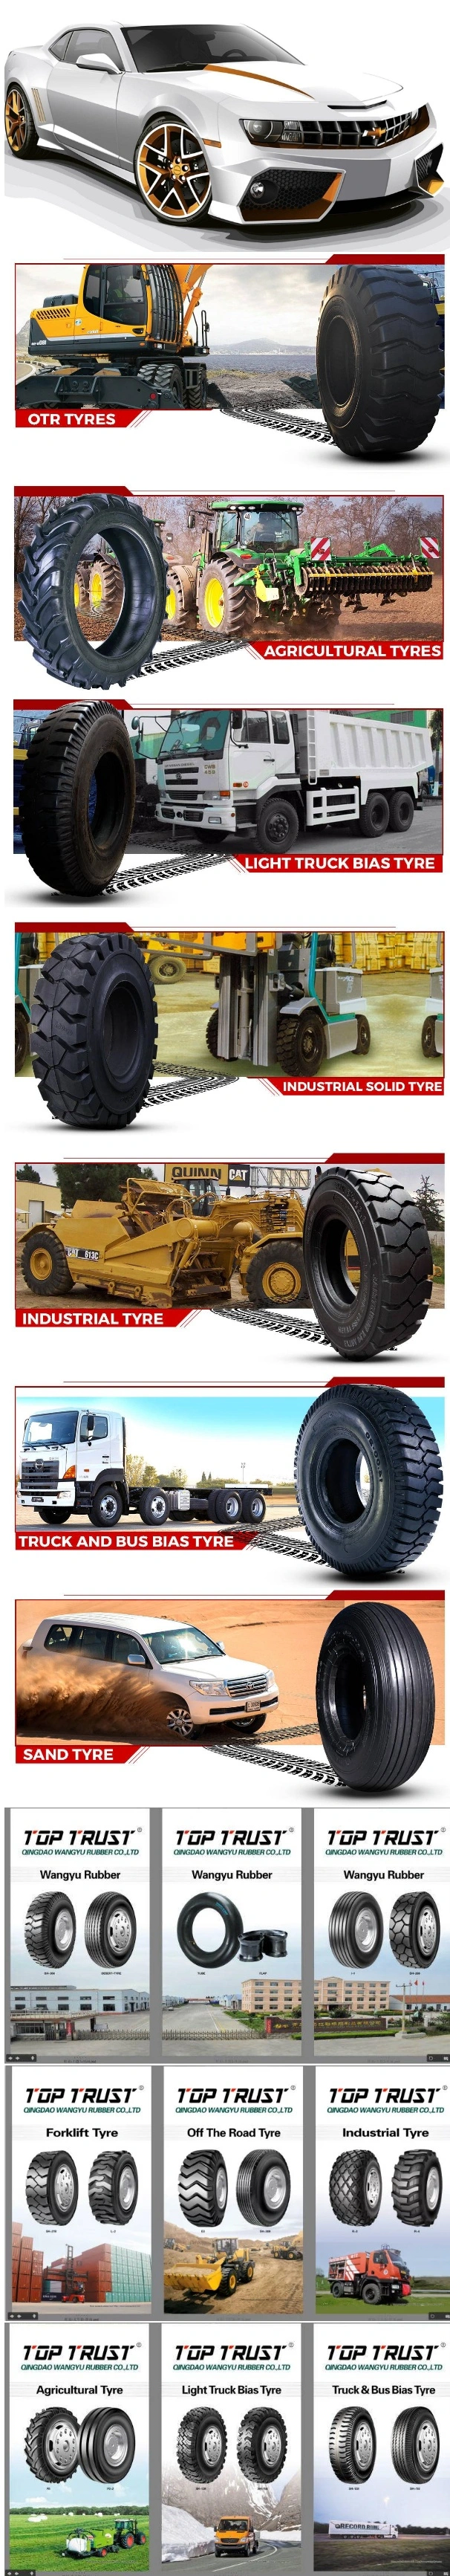 Industrial Pneumatic Tyres for Forklifts Tyre 8.25-12 7.00-12 with L-2 Pattern